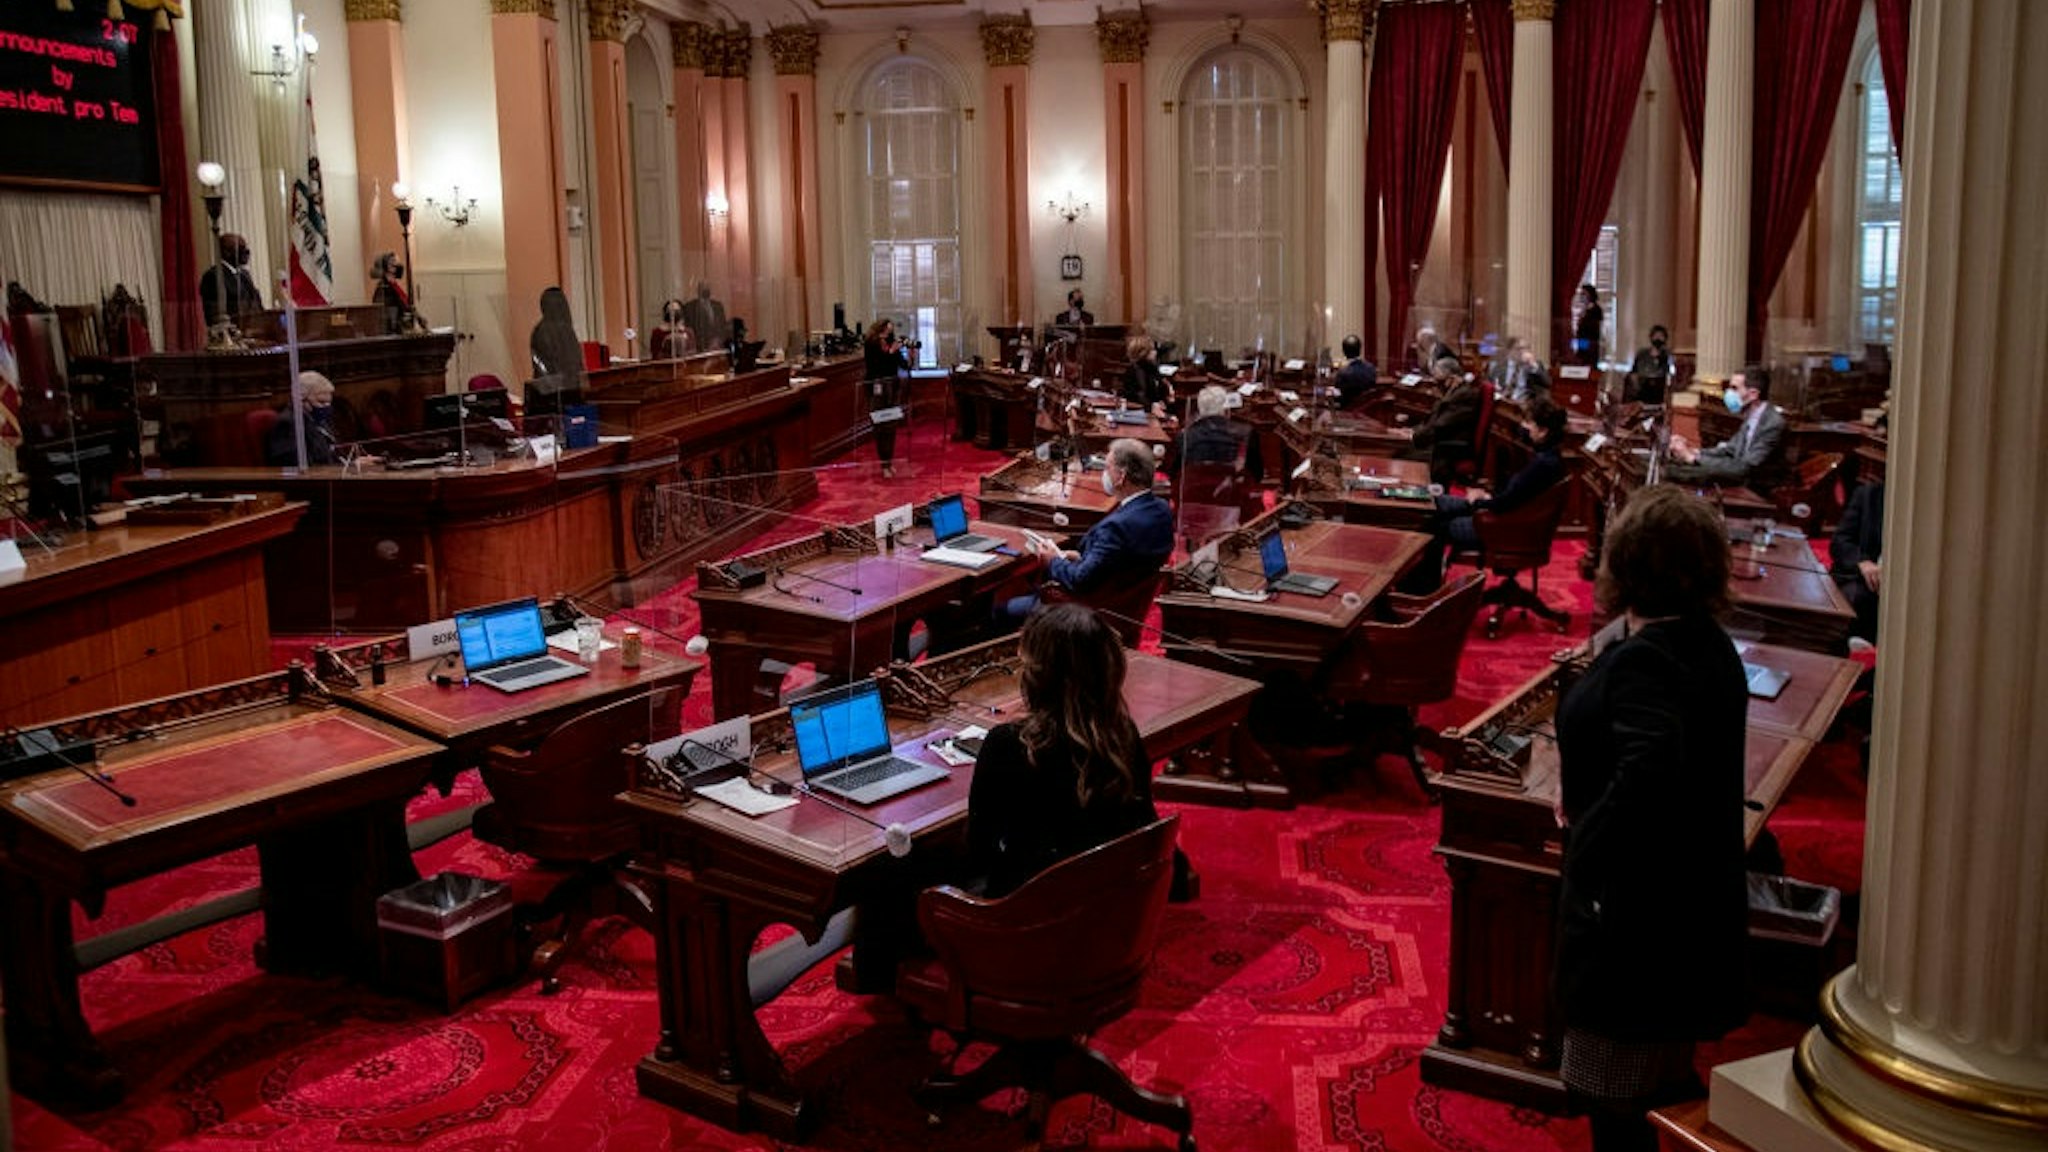 SACRAMENTO, CA -JANUARY 19, 2021: Plexiglass partitions have been set up in the Senate chamber because of Covid during a session in the Capitol on January 19, 2021 in Sacramento, California.